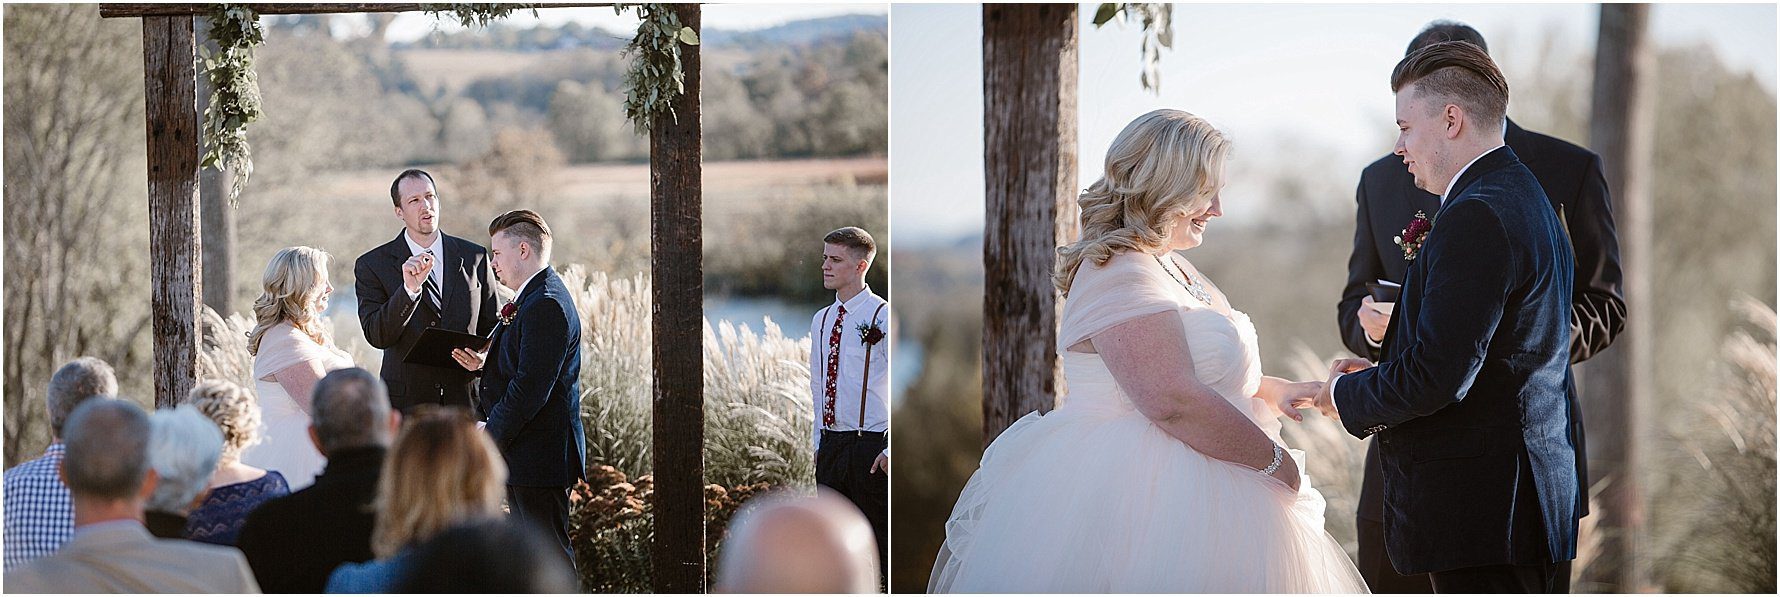 Fall Wedding Venues in Knoxville | Erin Morrison Photography www.erinmorrisonphotography.com